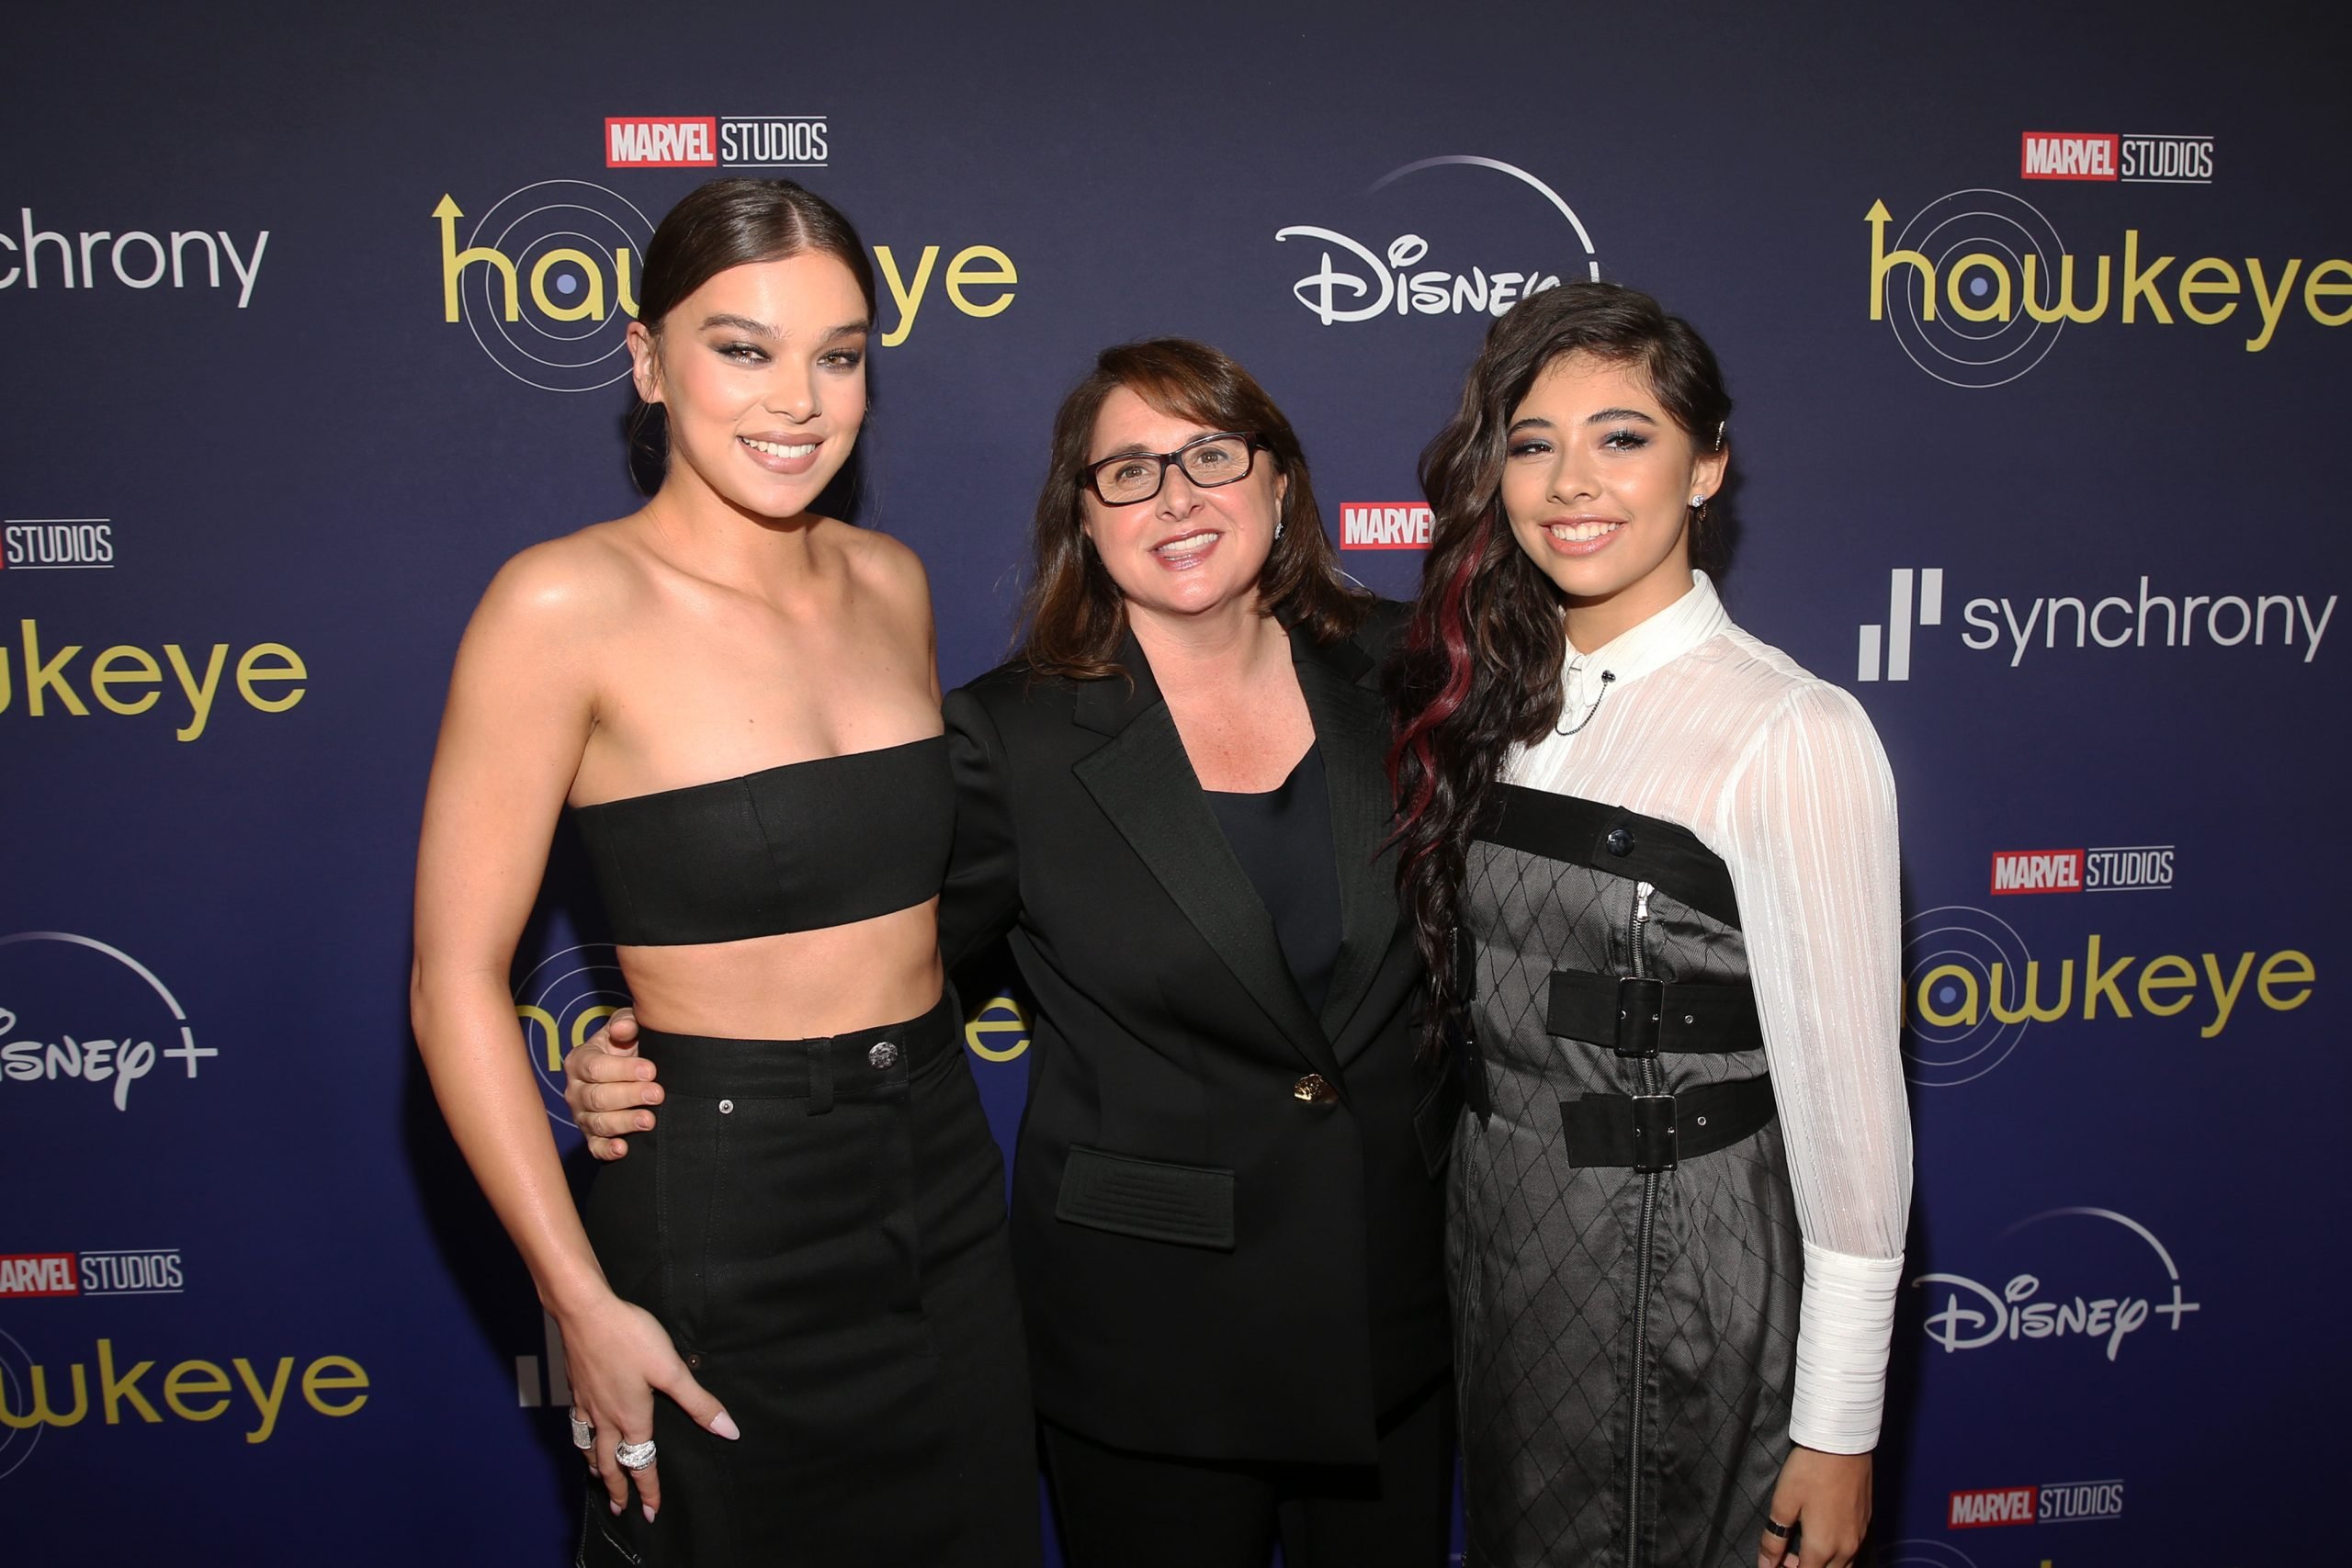 Hailee Steinfeld, Victoria Alonso Alonso, and 'Doctor Strange 2' actor Xochitl Gomez pose for a picture at the 'Hawkeye' premiere